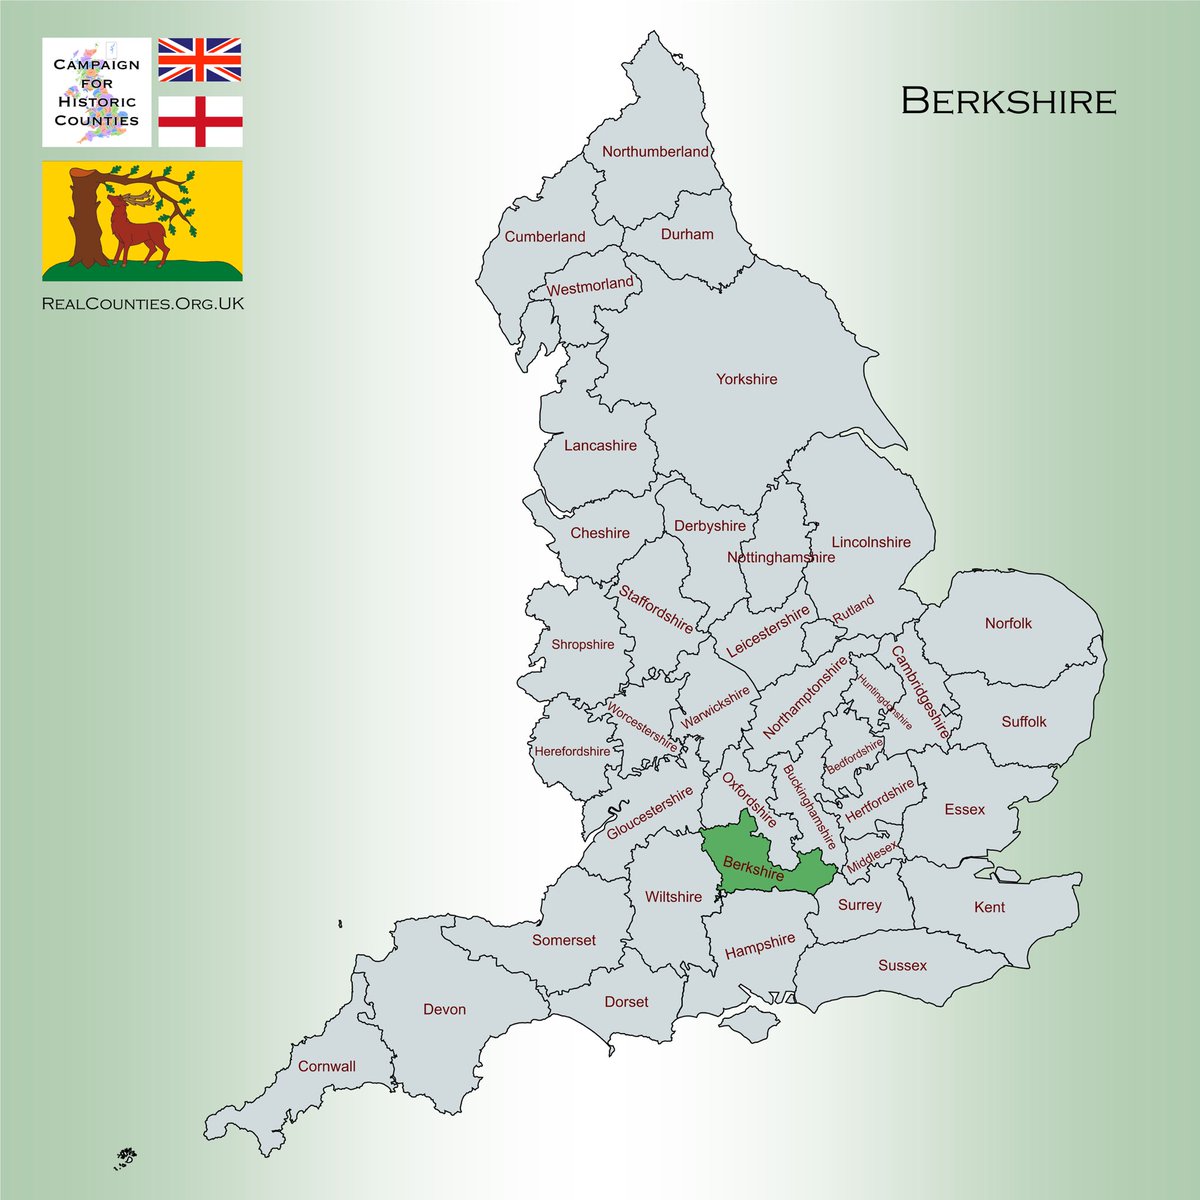 A Royal County in southern England, #Berkshire lies along the south bank of the River Thames.

The county's honorific prefix Royal dates to the 19th century at least.

This is because of the presence of #Windsor Castle in the county.

🇬🇧 #HistoricCounties | #RealCounties 🏴󠁧󠁢󠁥󠁮󠁧󠁿